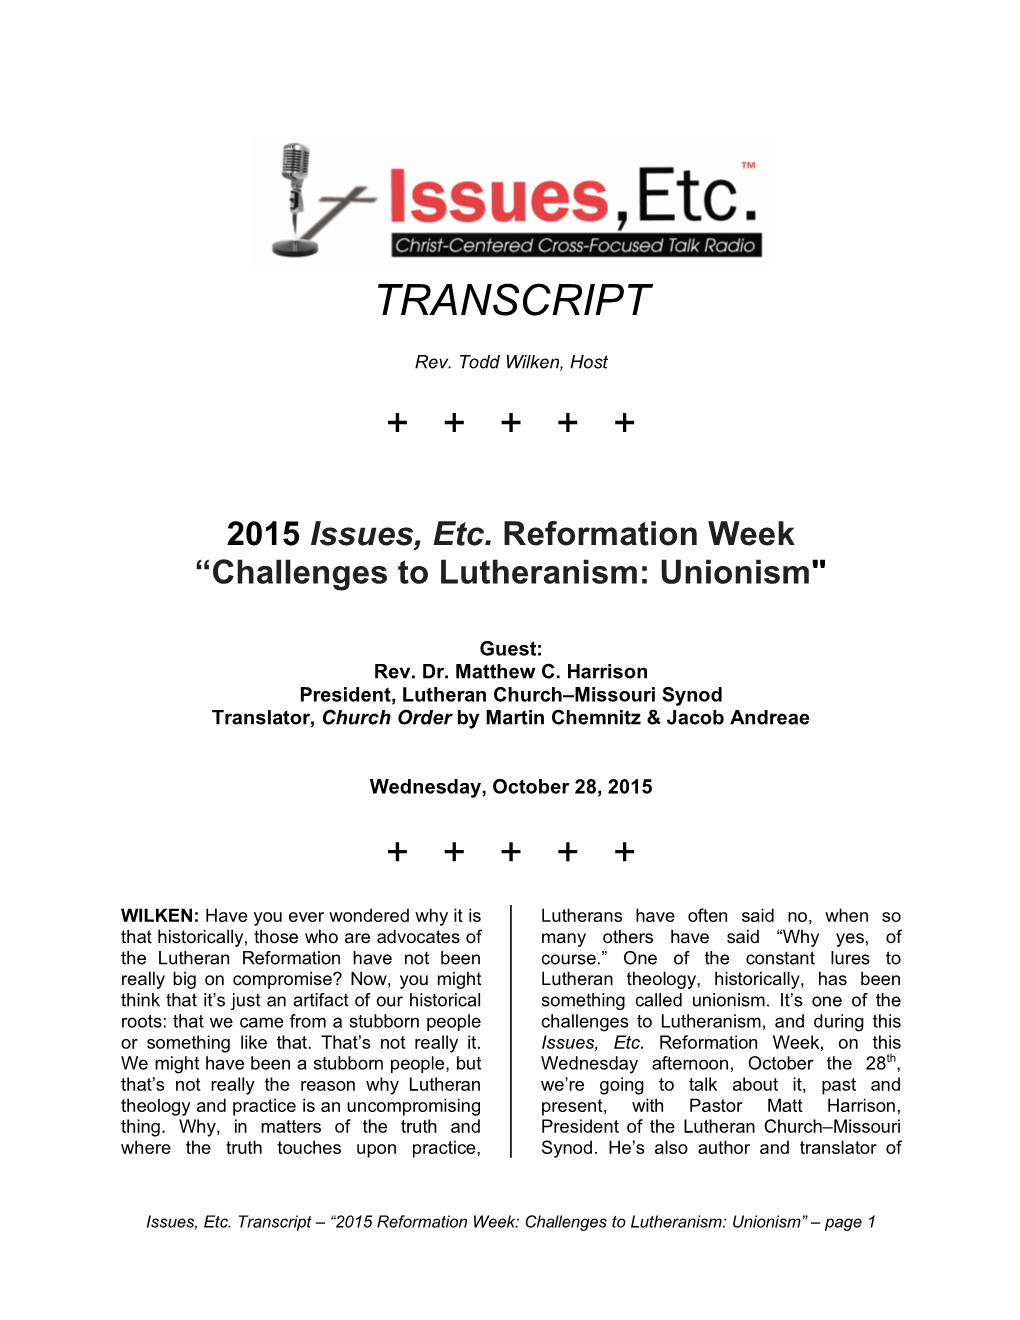 2015 Issues, Etc. Reformation Week, Challenges to Lutheranism